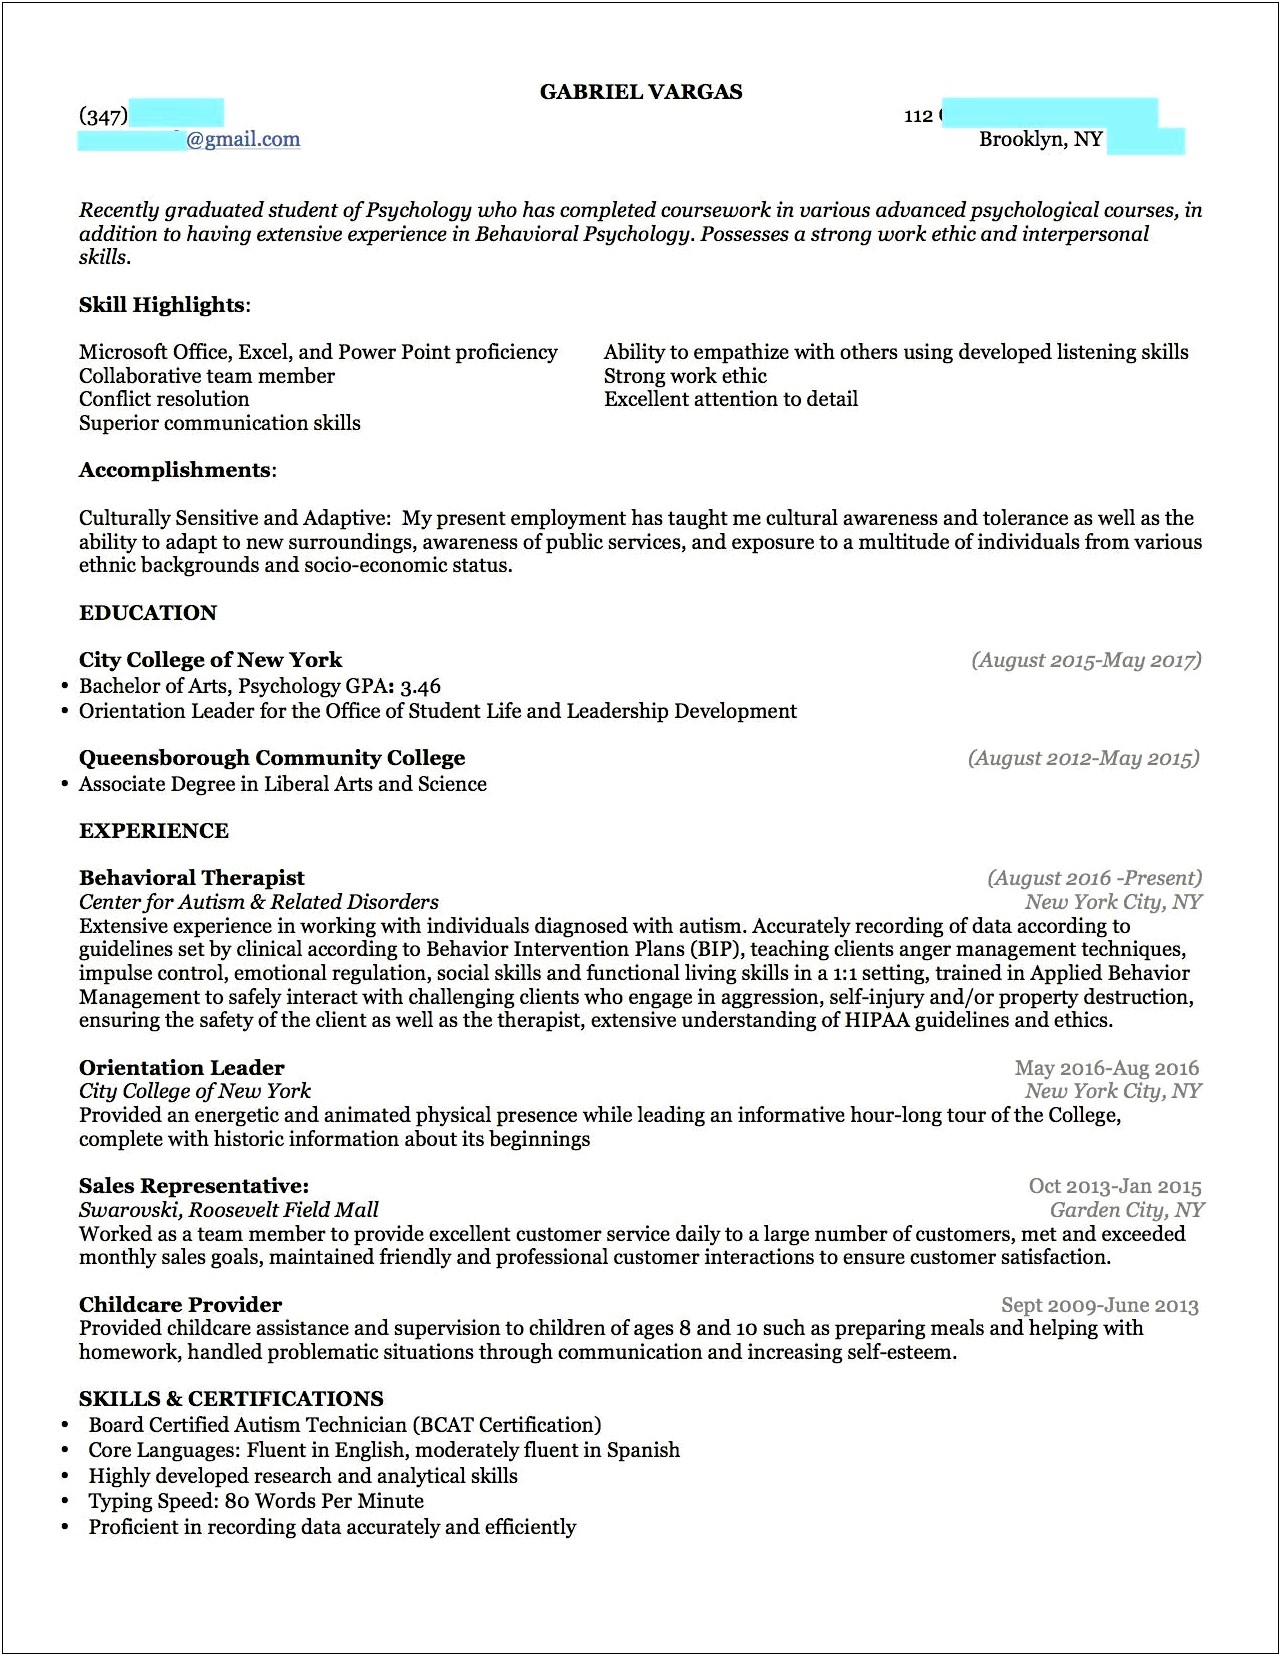 Resume Transition Daycare To Office Work